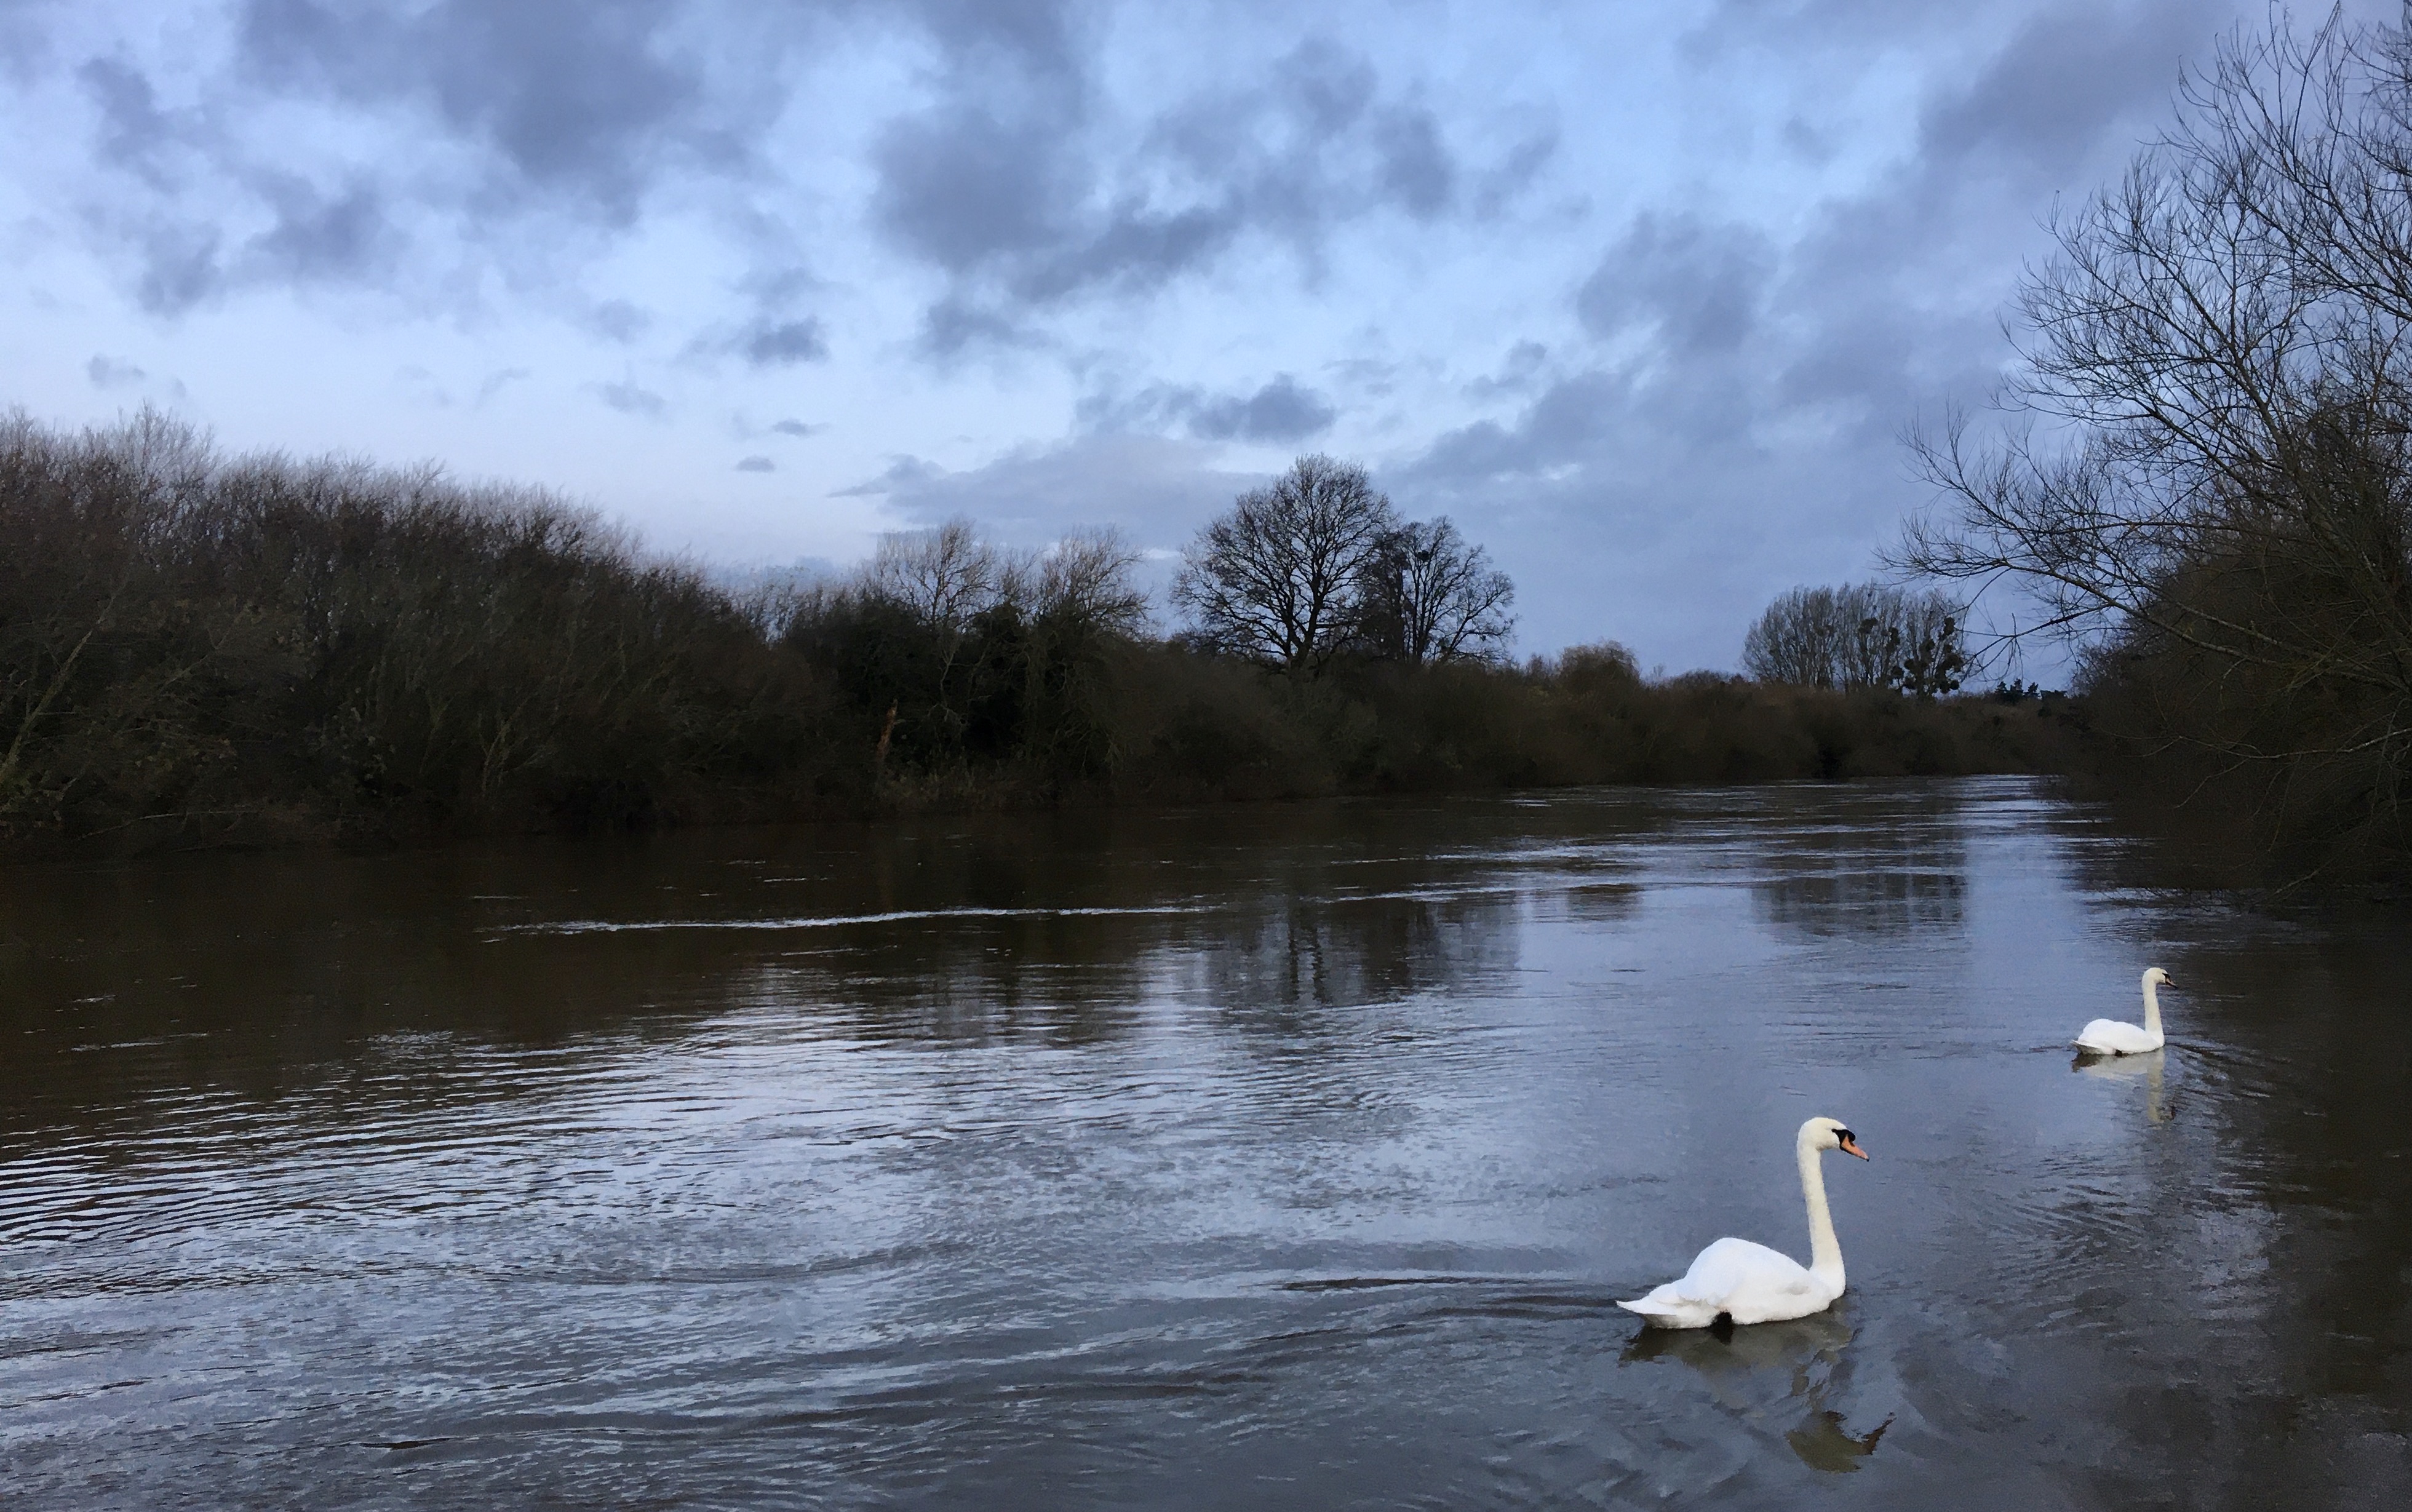 Swans on the swollen Severn